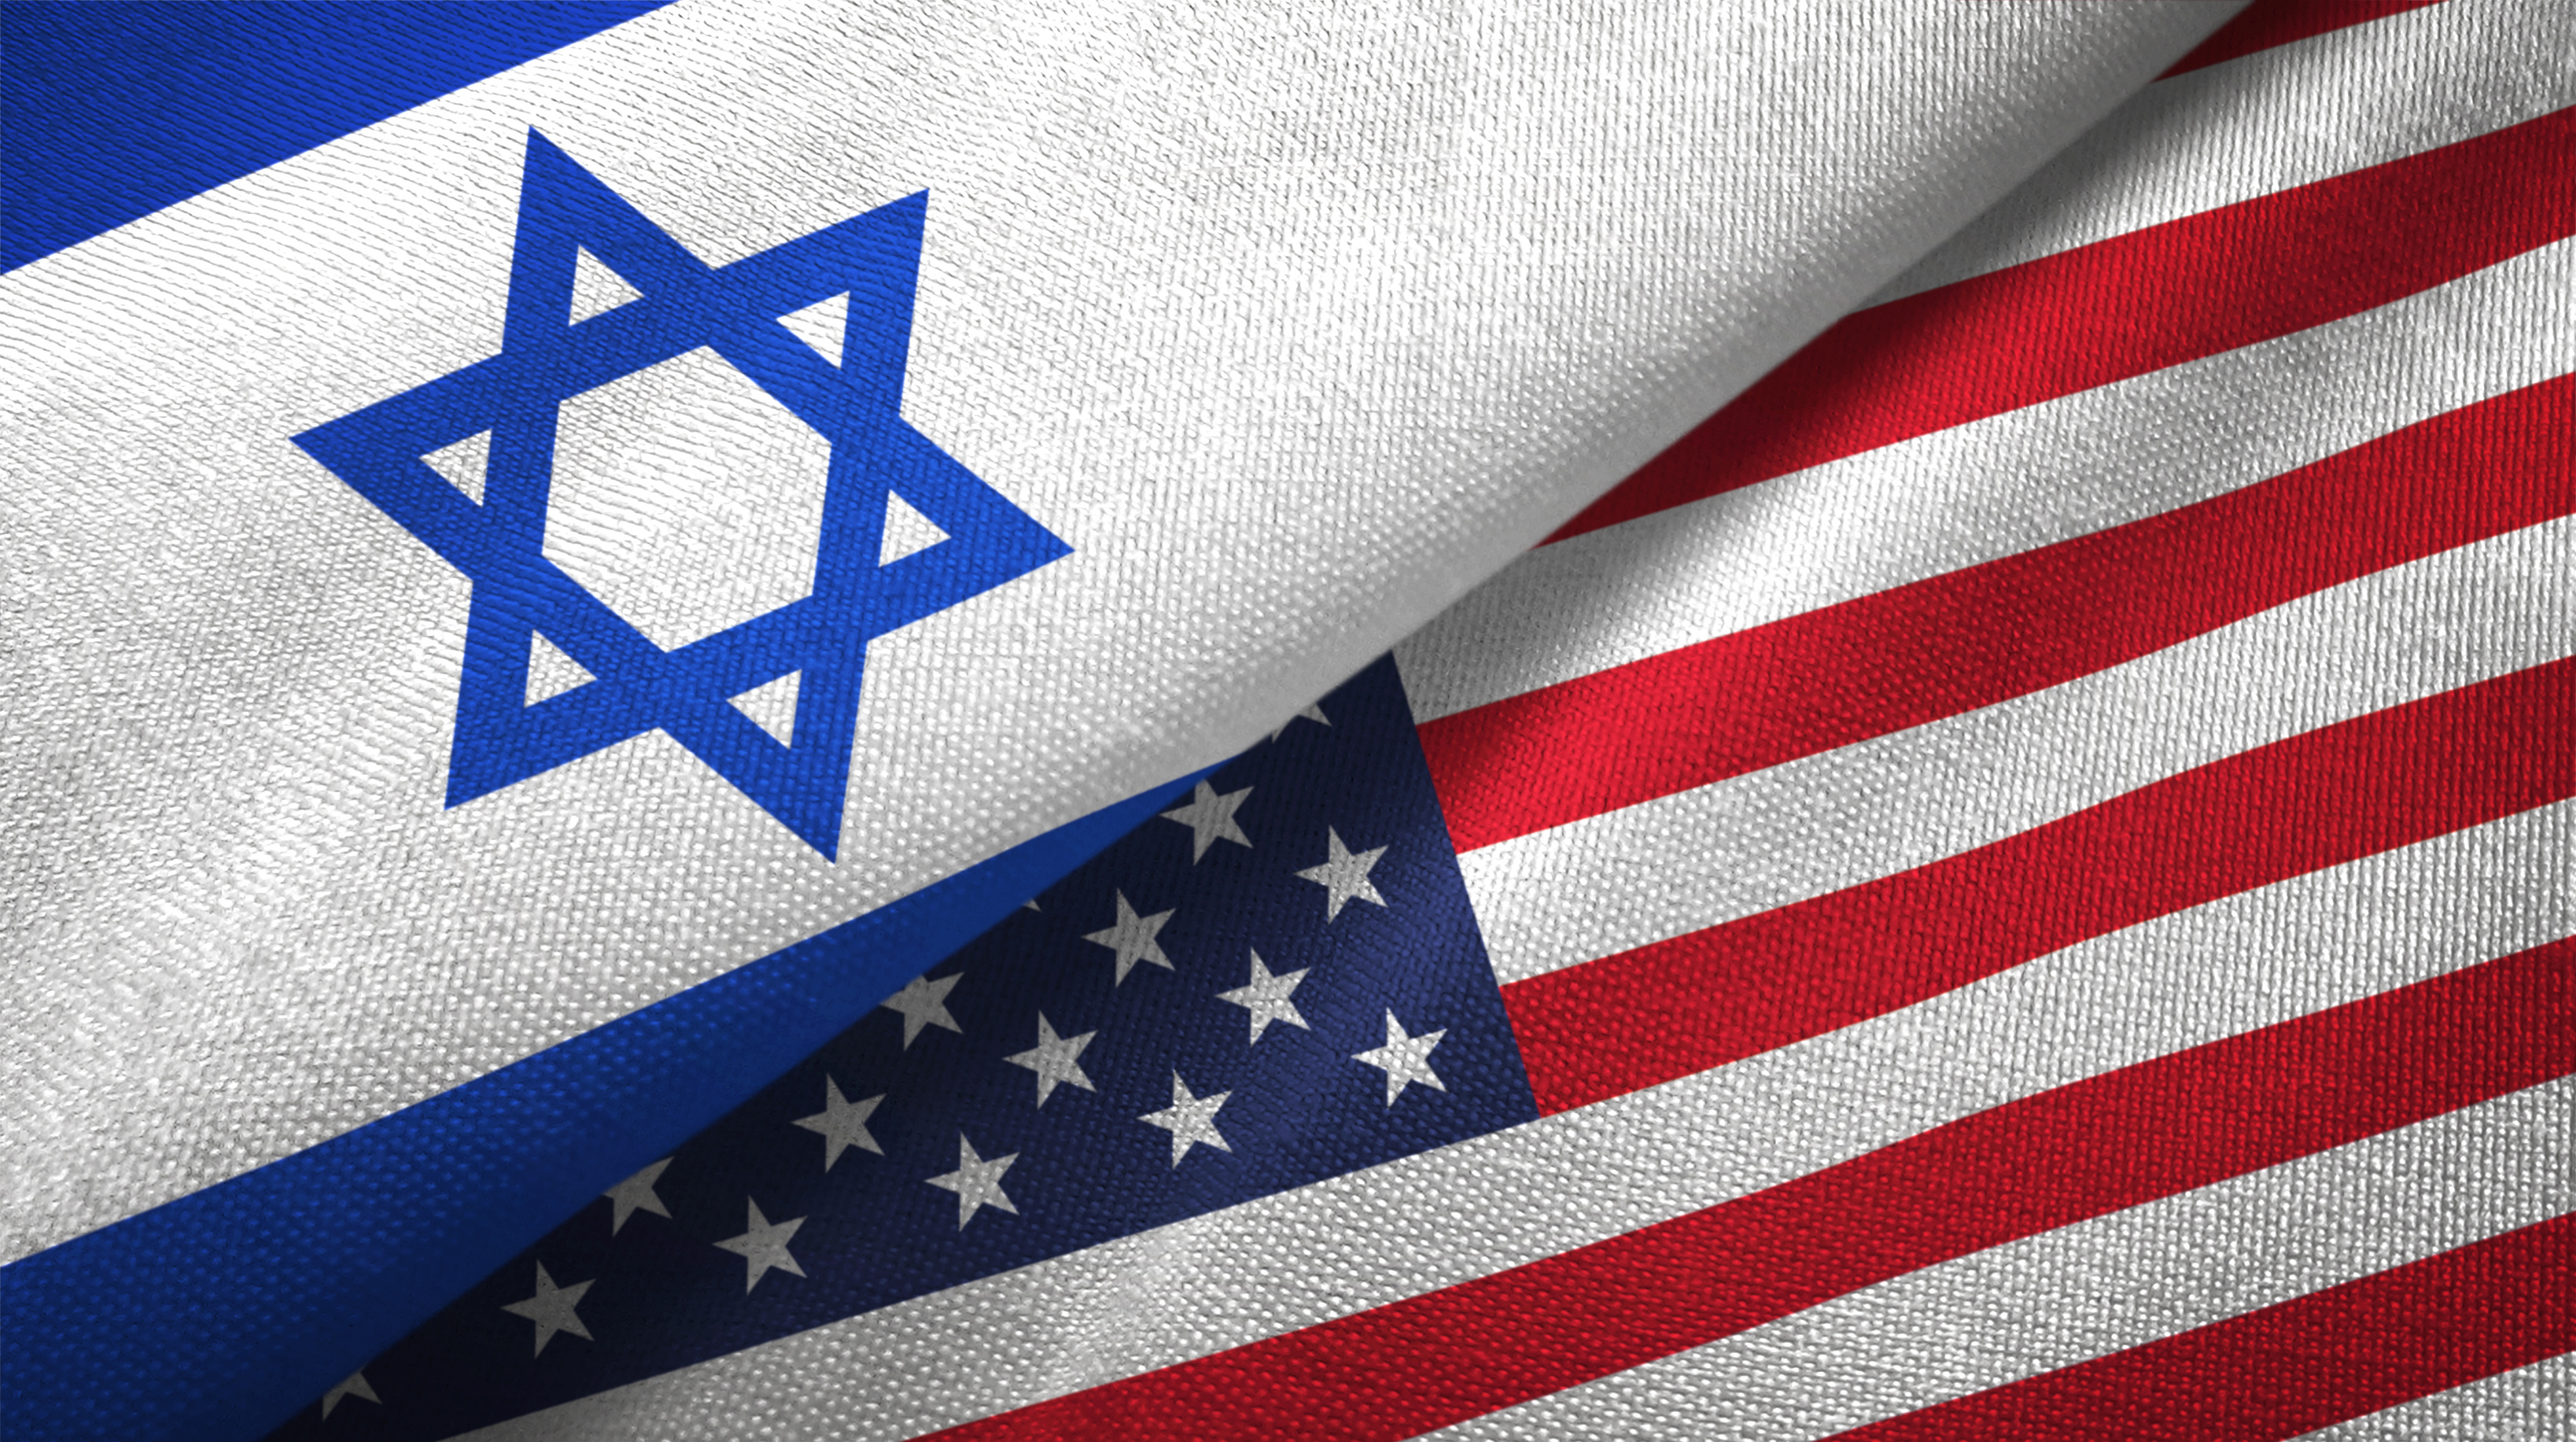 CWA Supports the Trump Administration’s stance on Israeli Settlements